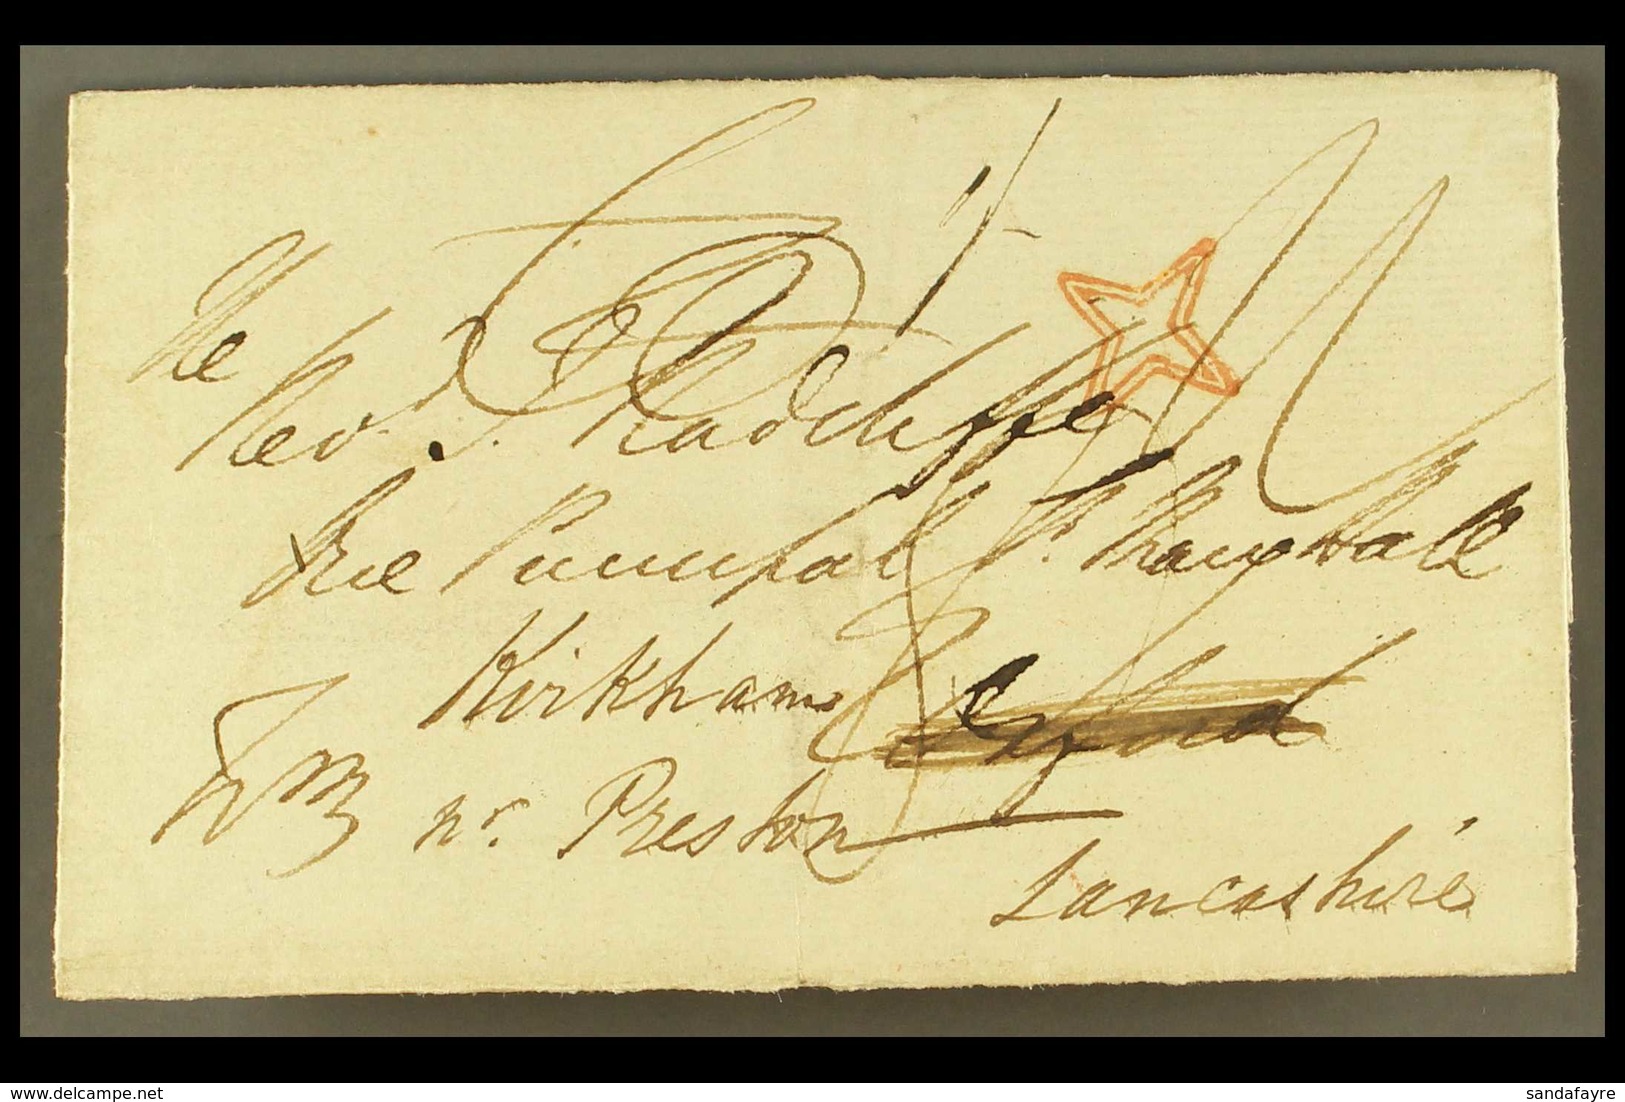 1836  (19 Feb) Entire Wrapper From Oxford To Kirkham, Nr Preston Addressed In The Hand Of, And Endorsed By "WN" Arthur W - ...-1840 Vorläufer